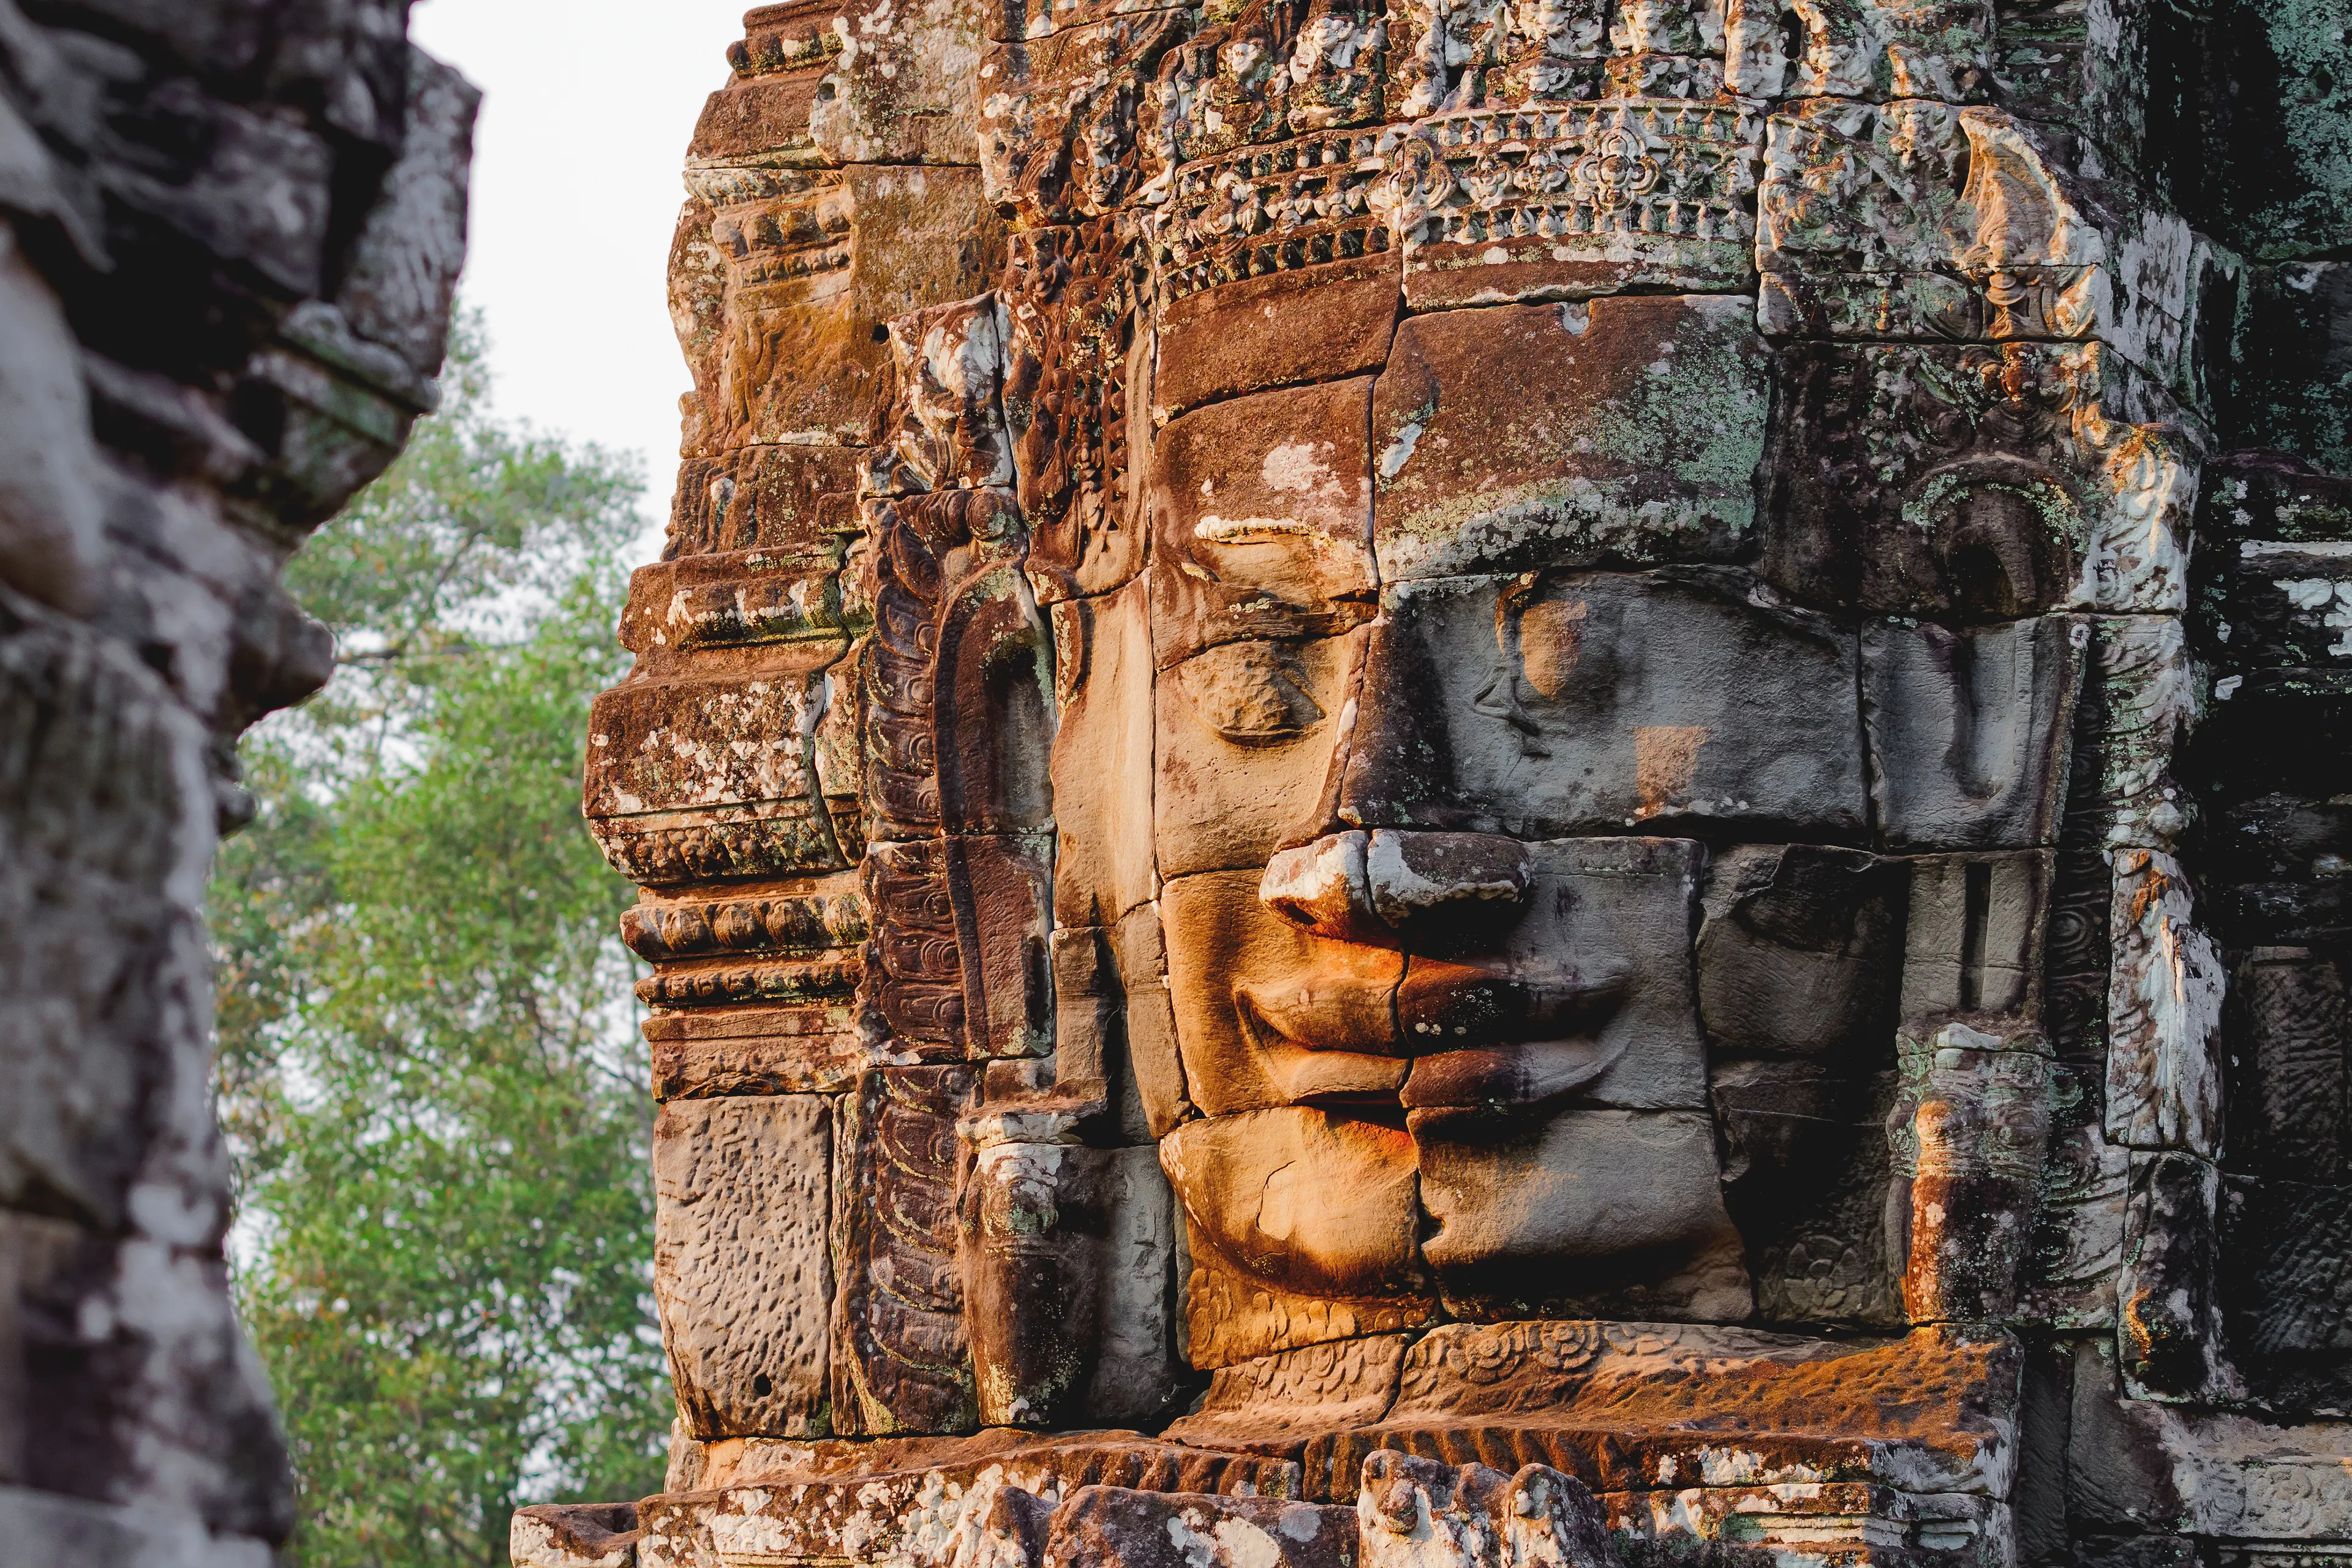 1-Day Local Experience: Angkor Wat Sightseeing & Nightlife with Friends